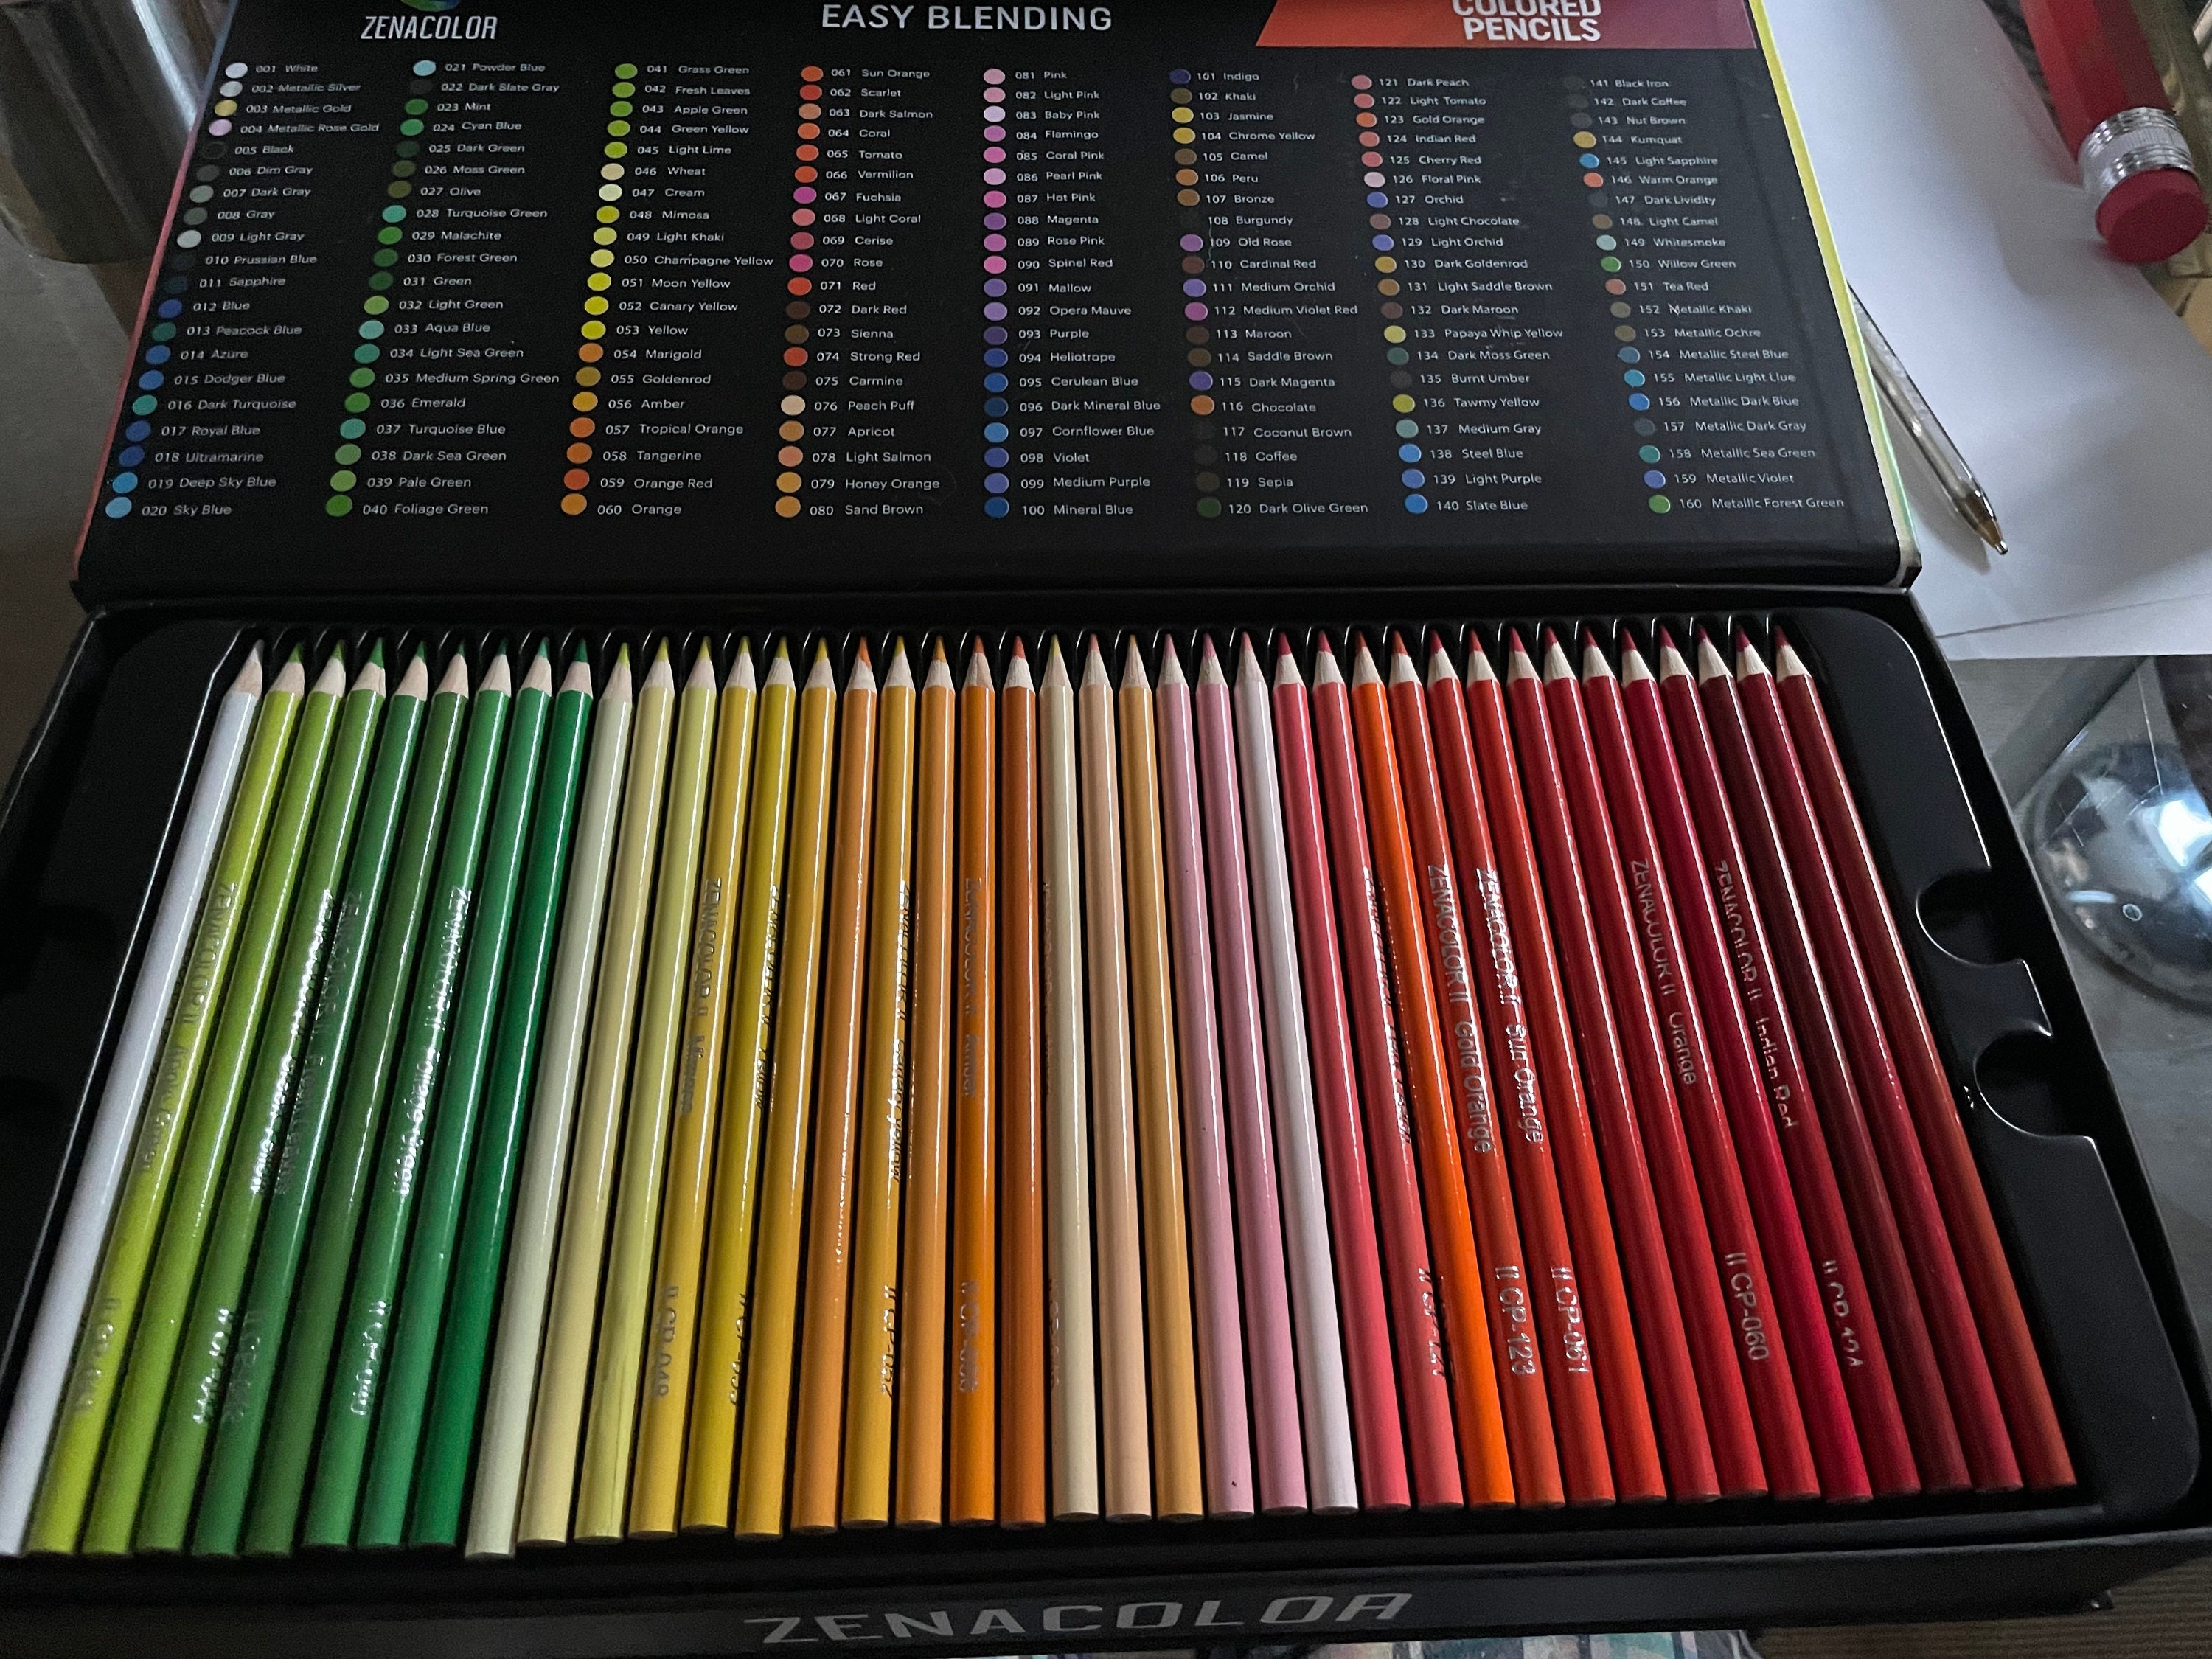 KALOUR 132 Colored Pencils Set,with Adult Coloring Book and